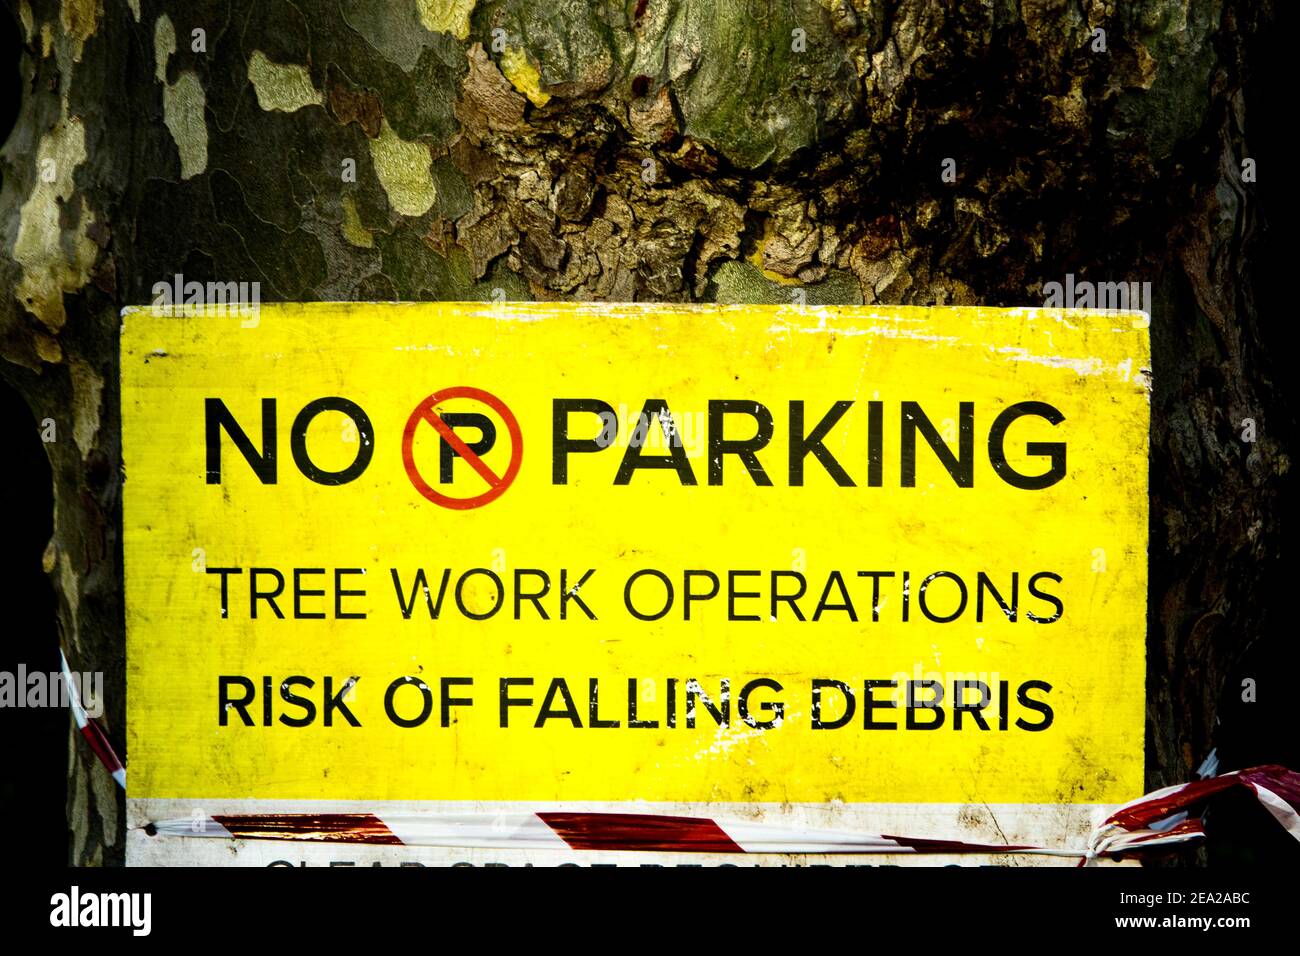 No Parking sign beneath a tree being felled during tree work operations. A warning of falling debris and branches placed by a tree surgeon. London, UK Stock Photo